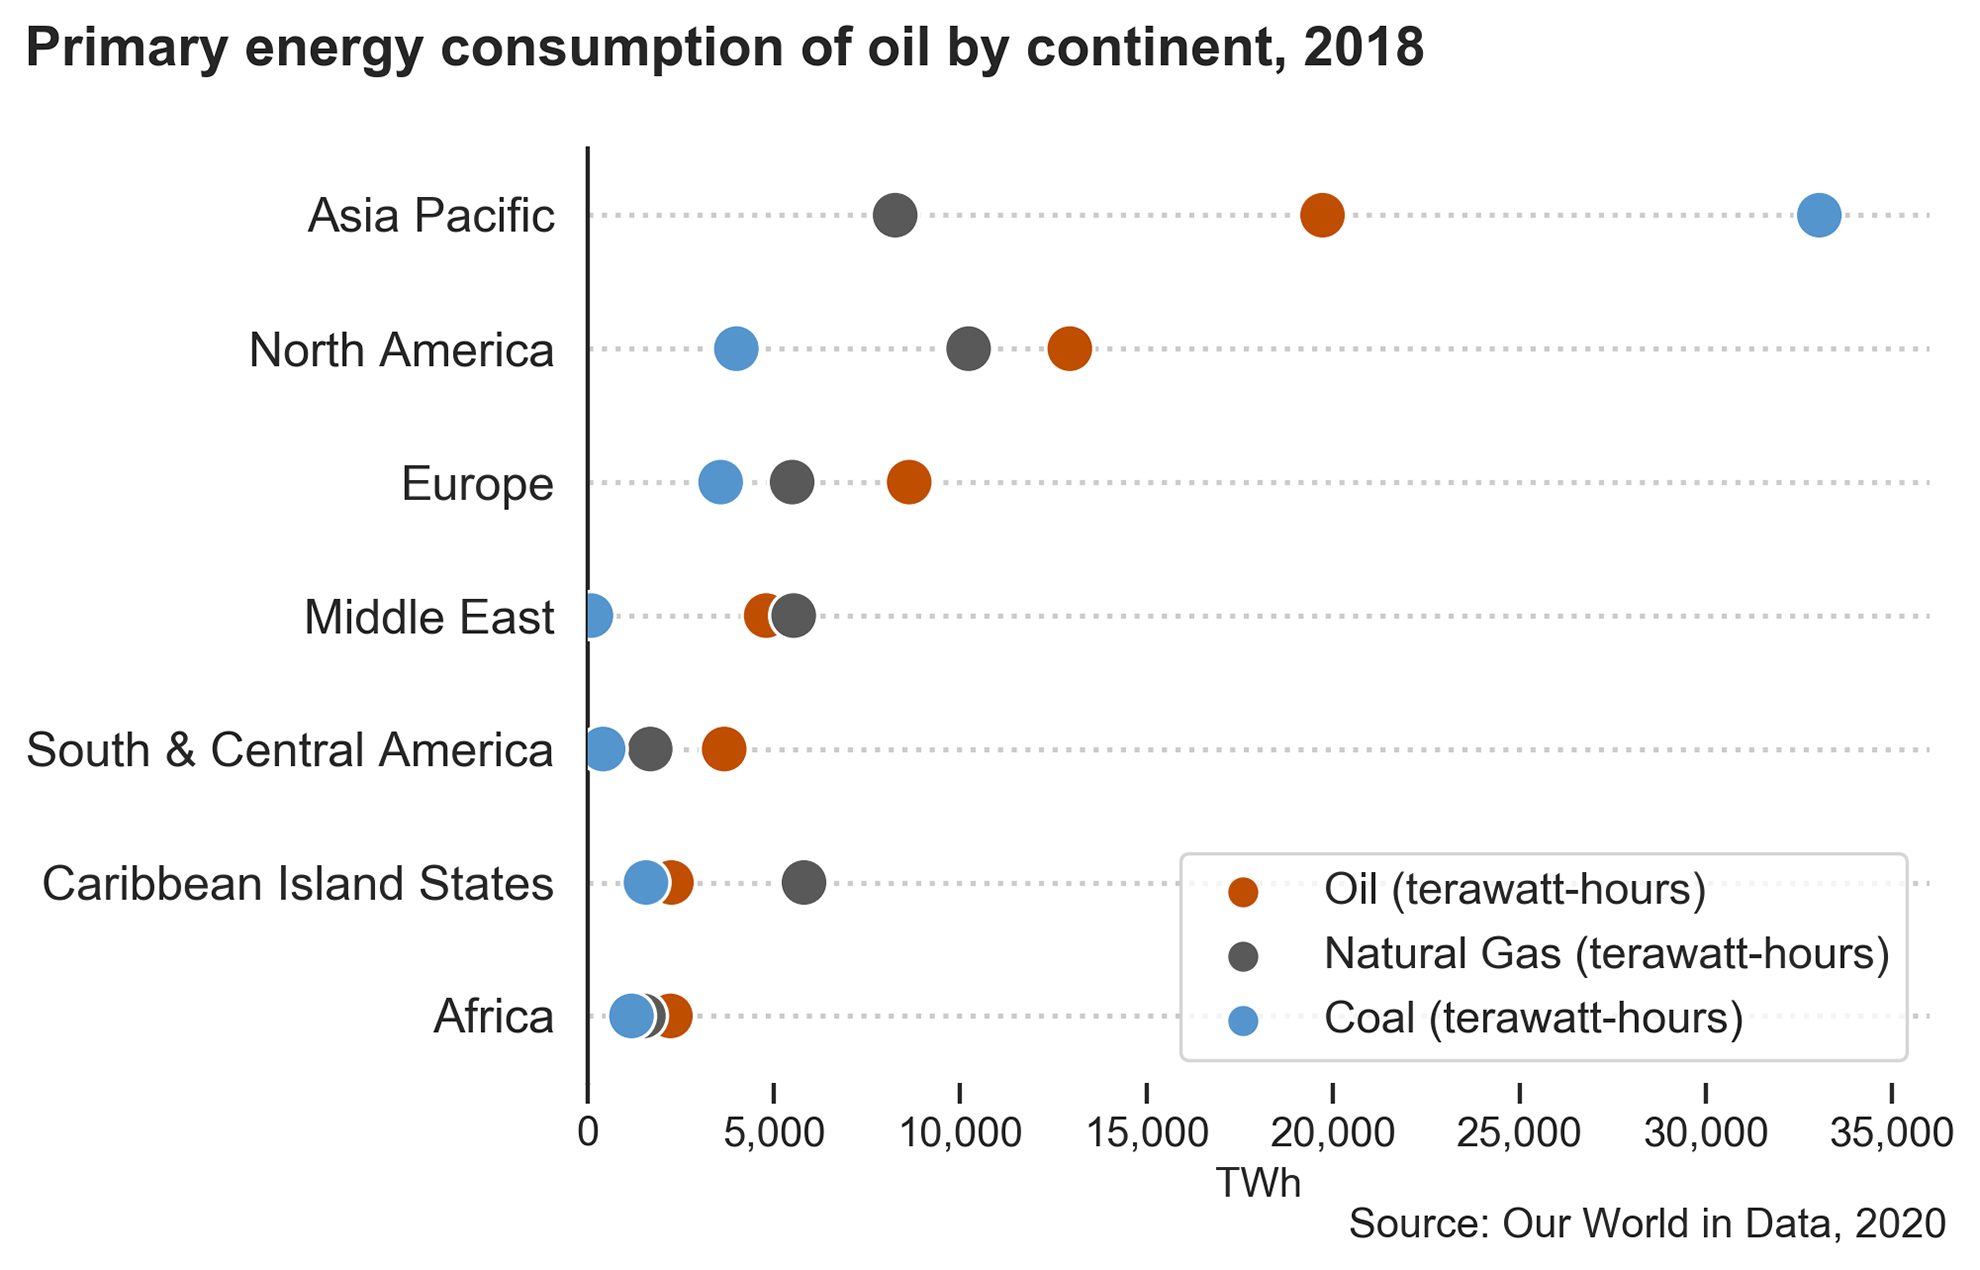 Cleveland dot plot visualizing primary energy consumption of oil by continent